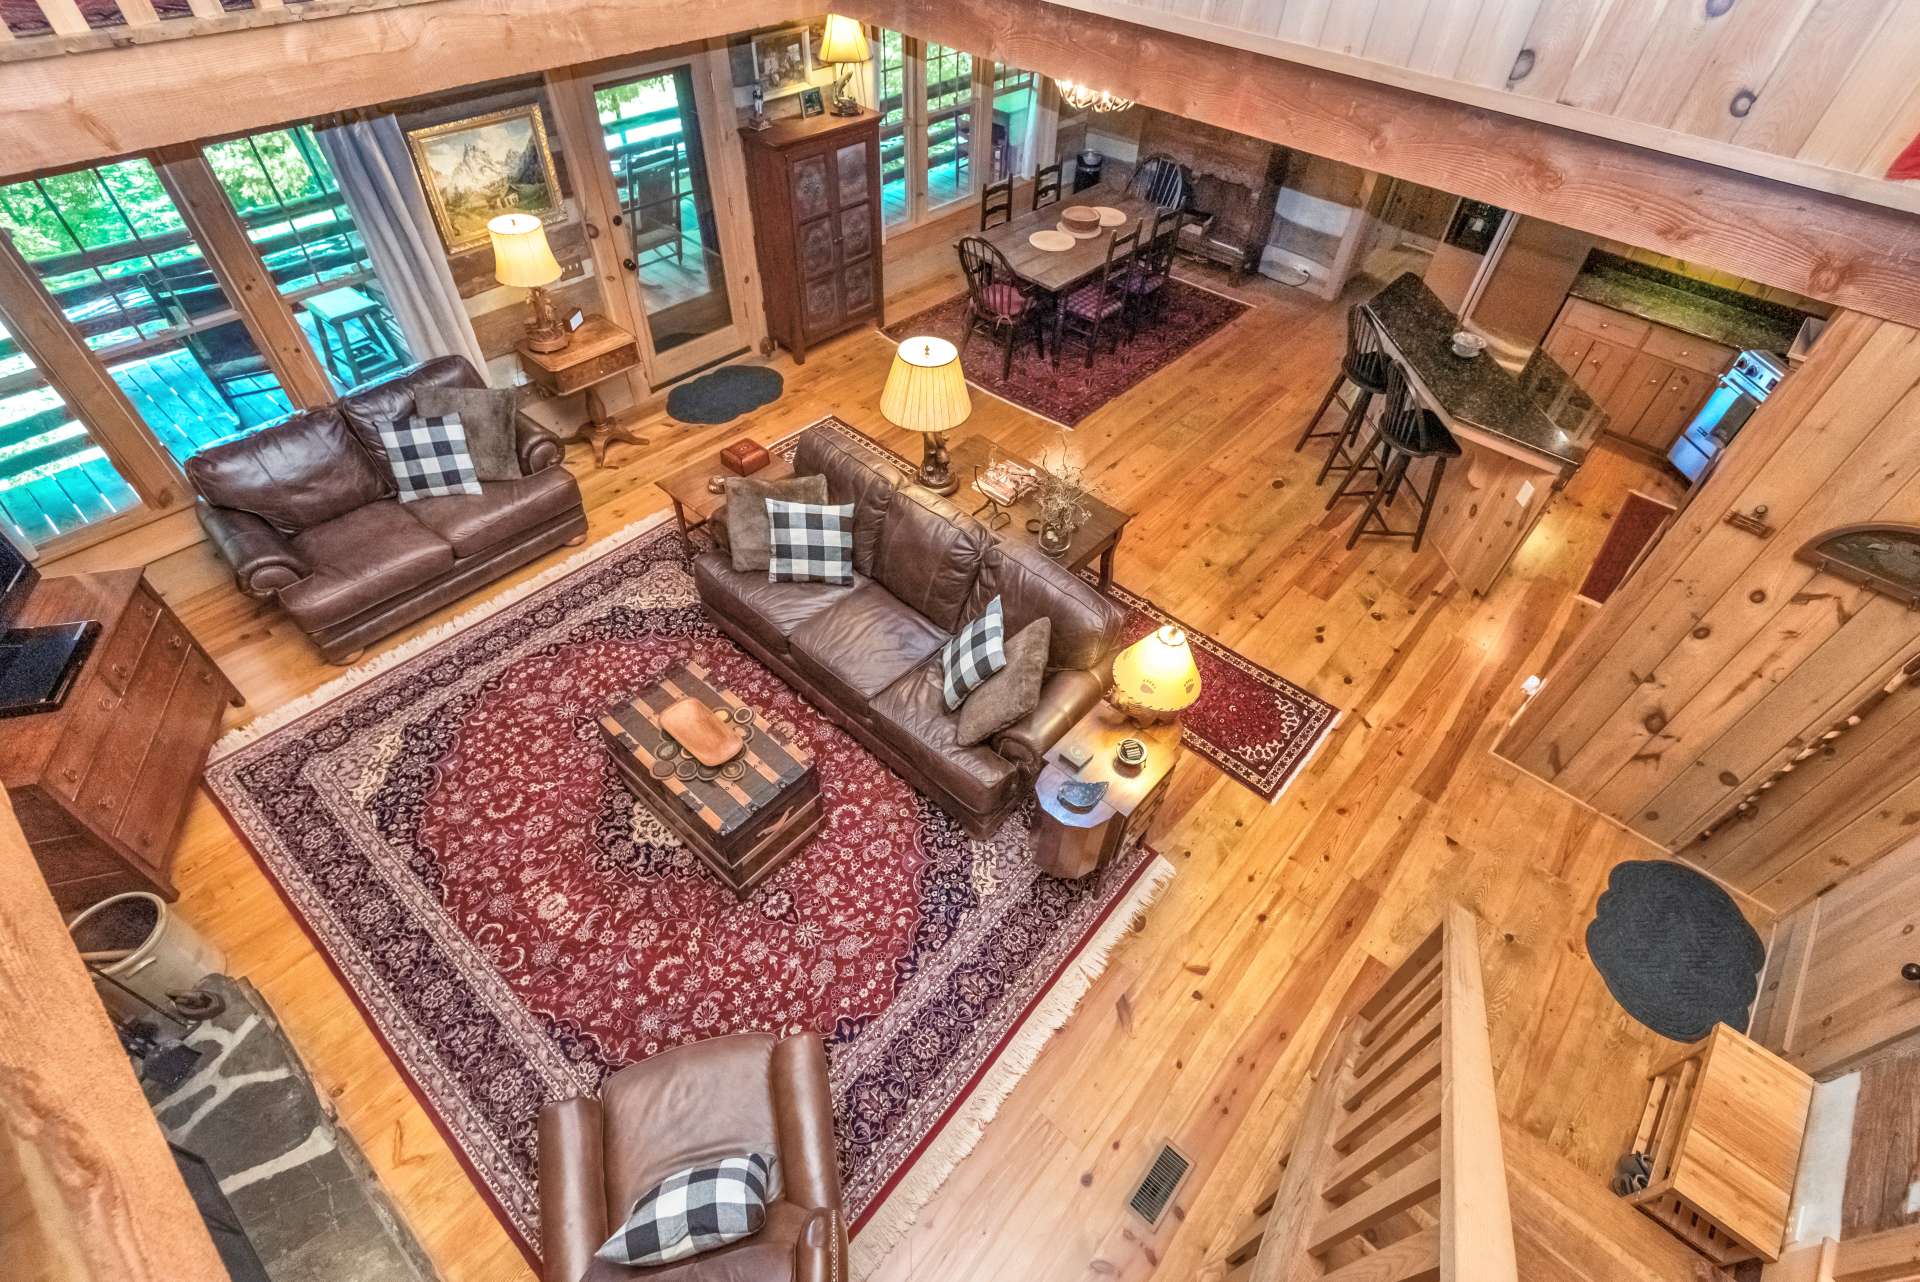 Your heart will feel full looking down at your family and friends spending time together in your mountain cabin.